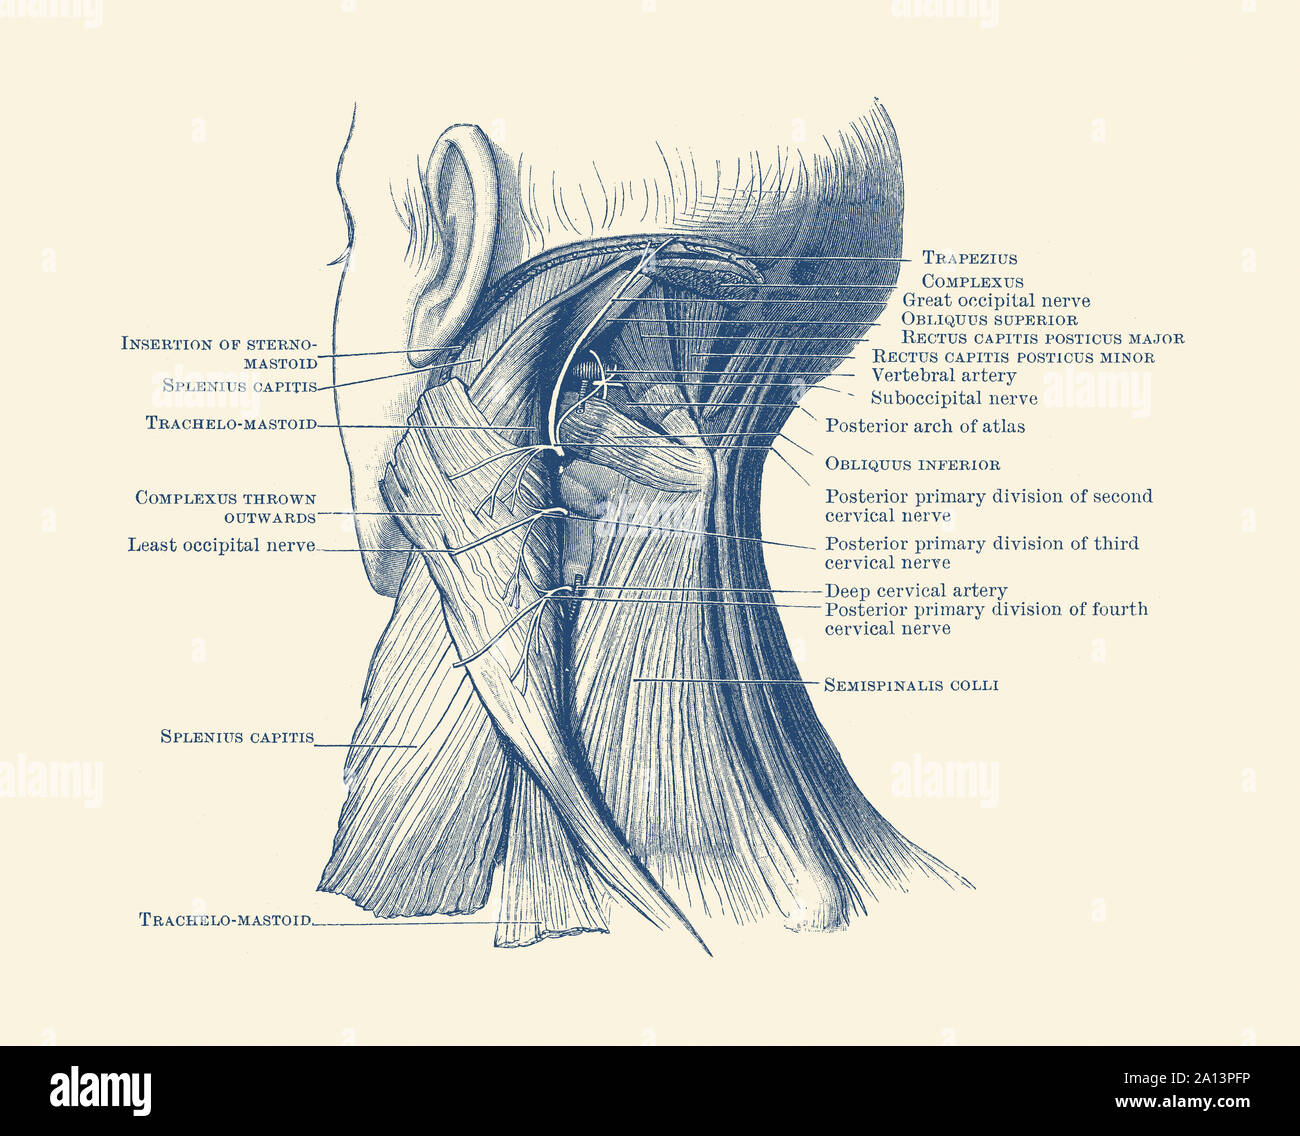 Diagram of the muscular system on the back of a human neck. Stock Photo